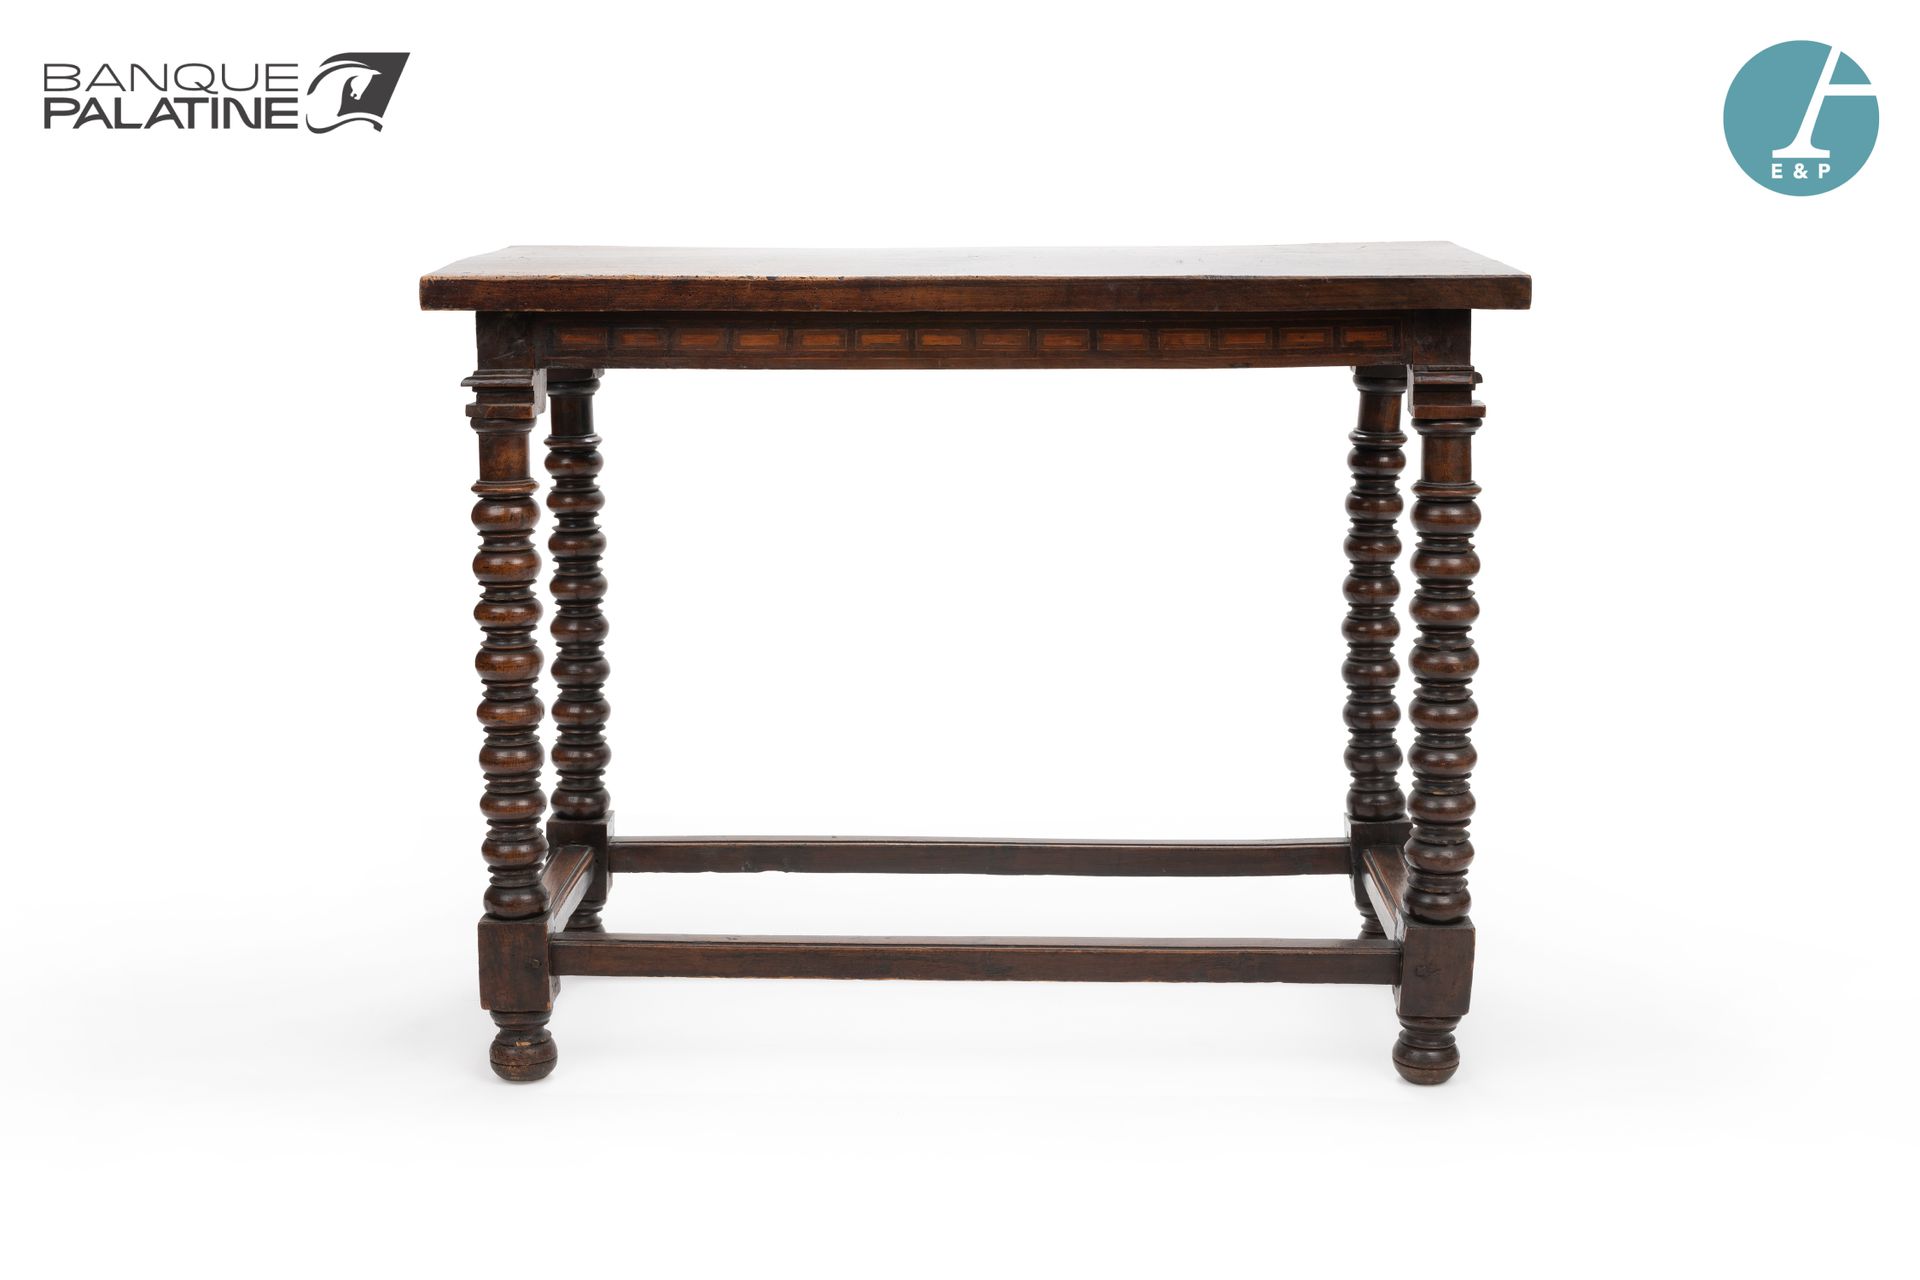 Null Table in natural wood with mouldings, the legs in twisted columns joined by&hellip;